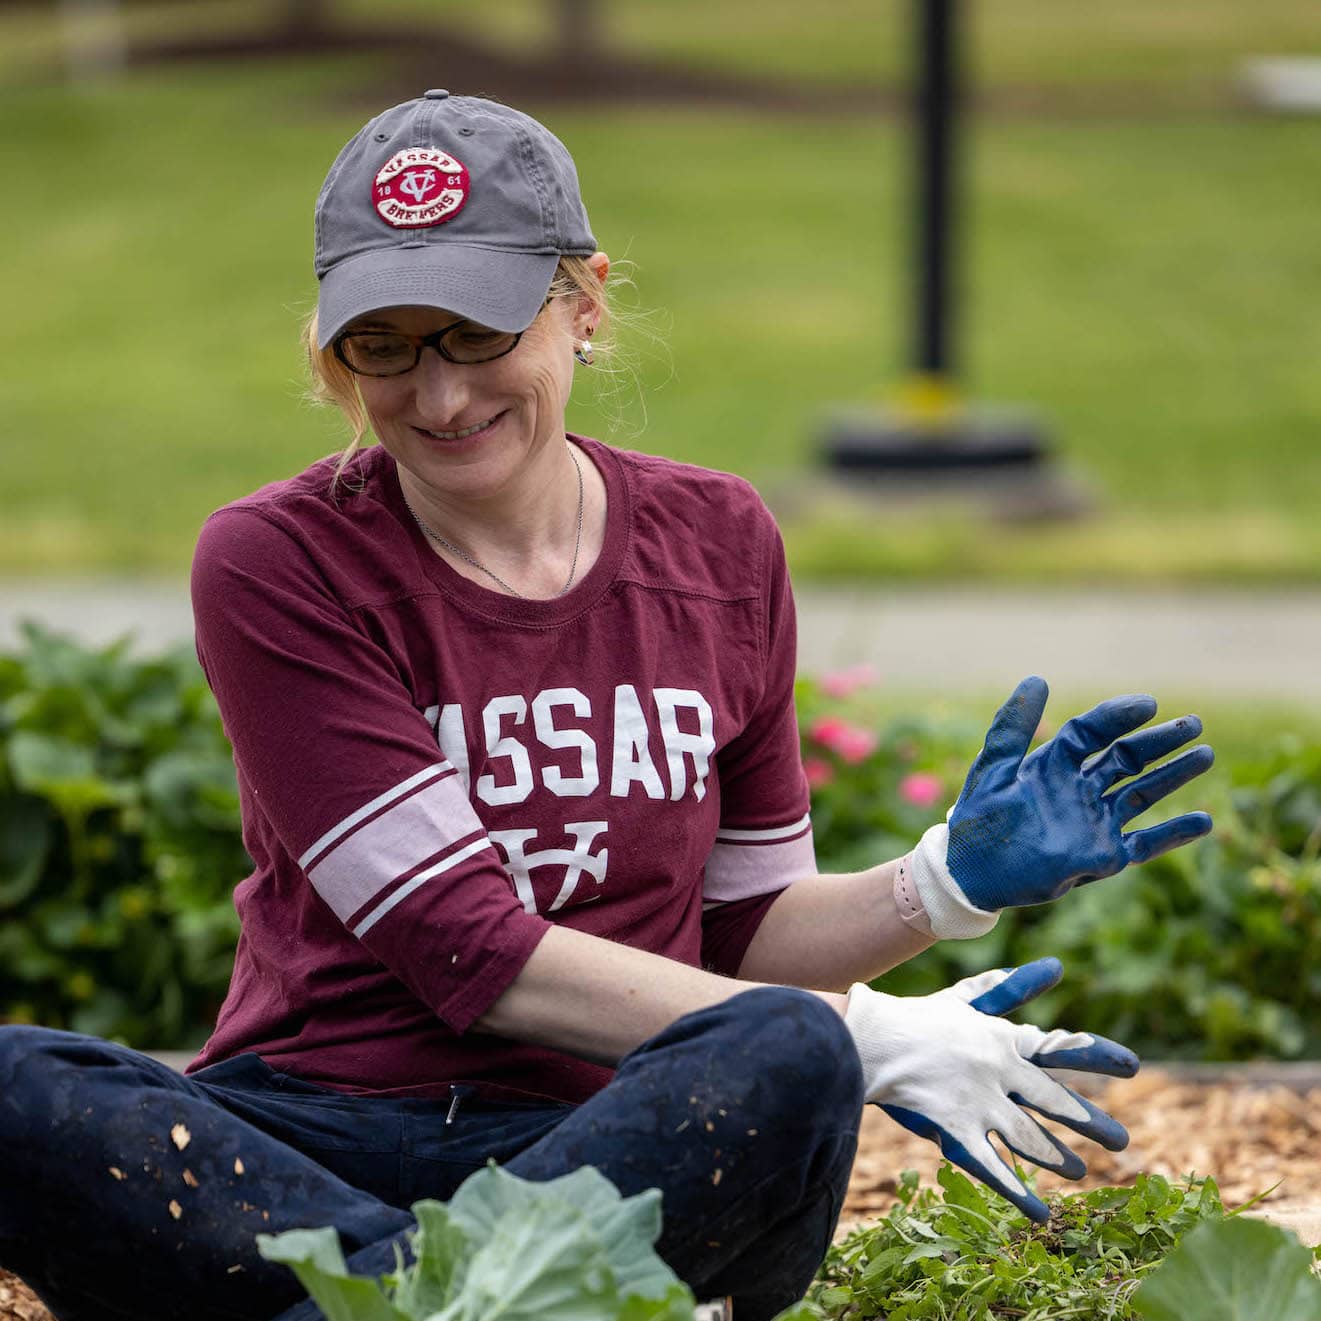 A person in a Vassar jersey and baseball cap, sits on the ground with gloves on, planting flowers.